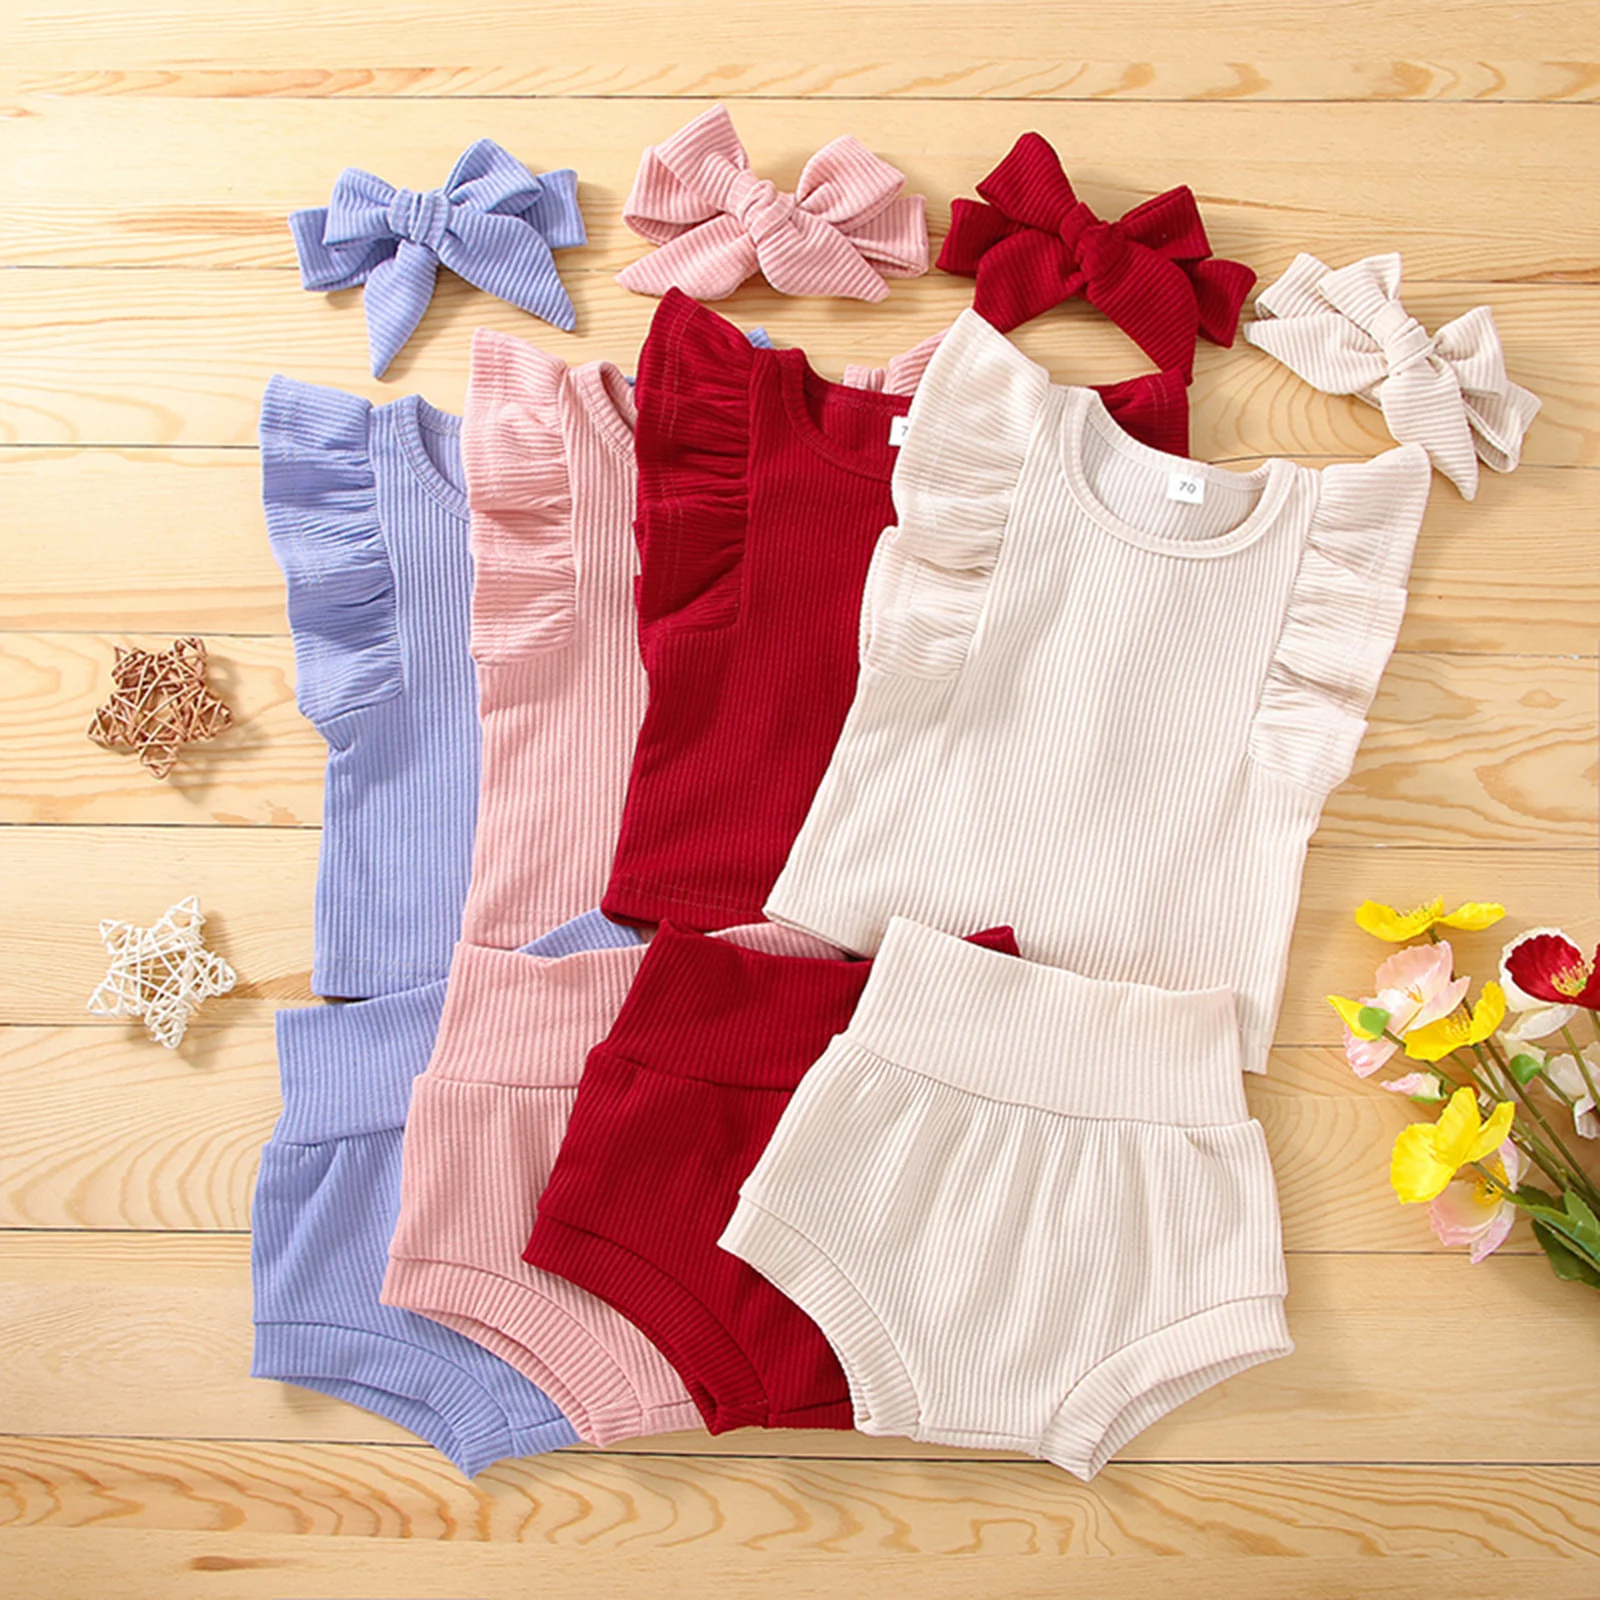 

3Pcs Baby Summer Ribbed Outfit Solid Color Flying Sleeve Tops + Shorts + Hairband Set for Baby Girl Clothes 0-24 Months